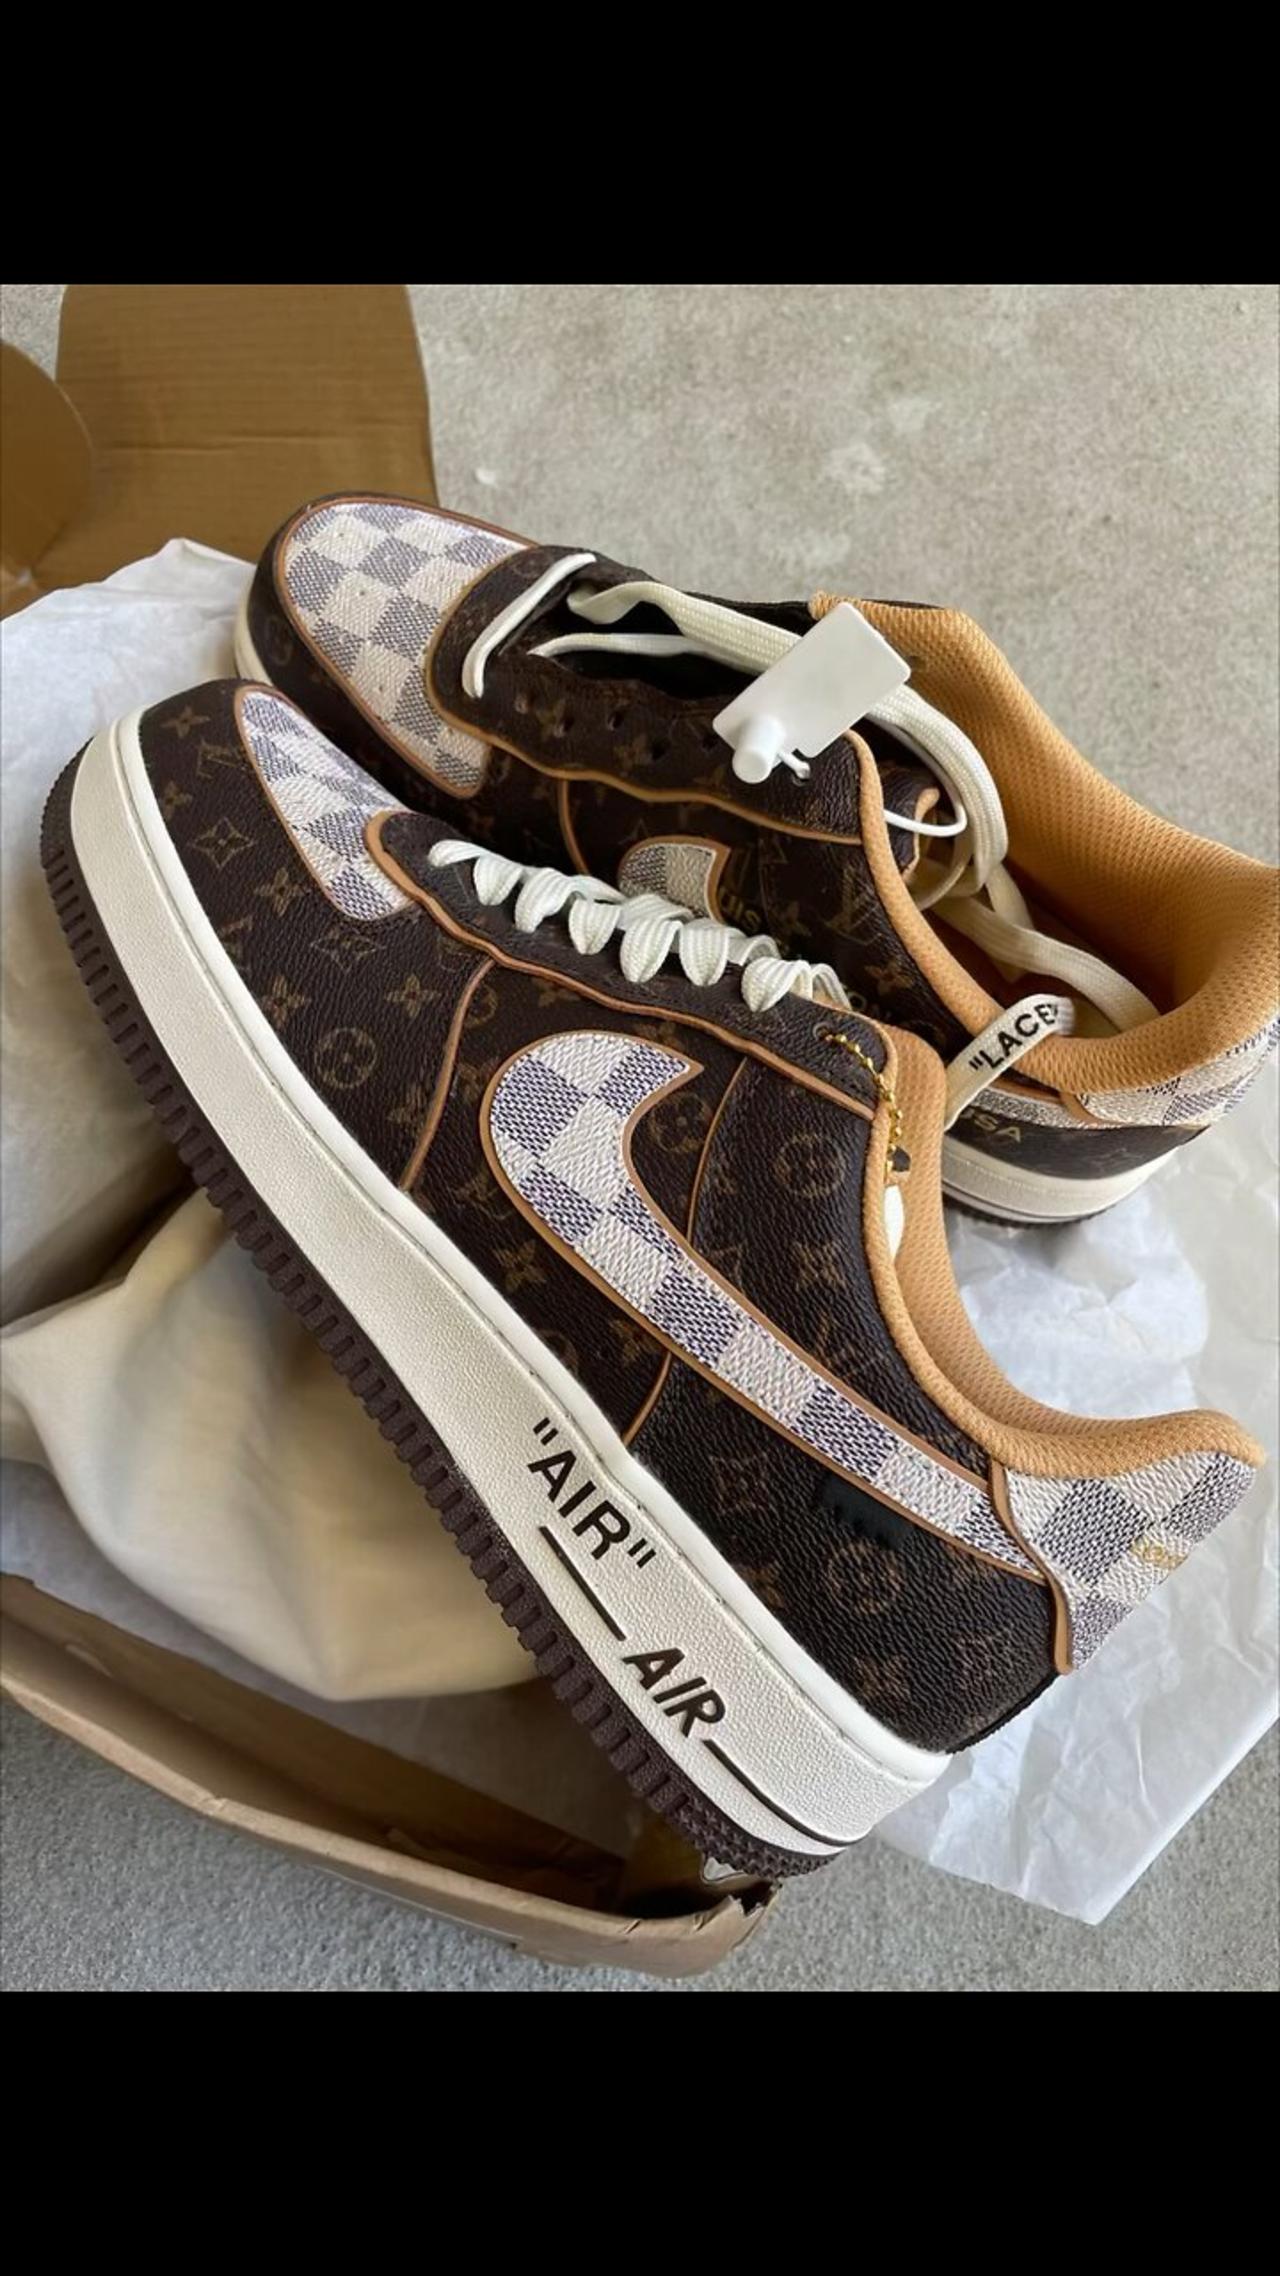 This is a pair fake Nike Air Force 1 LV shoes, don’t buy them